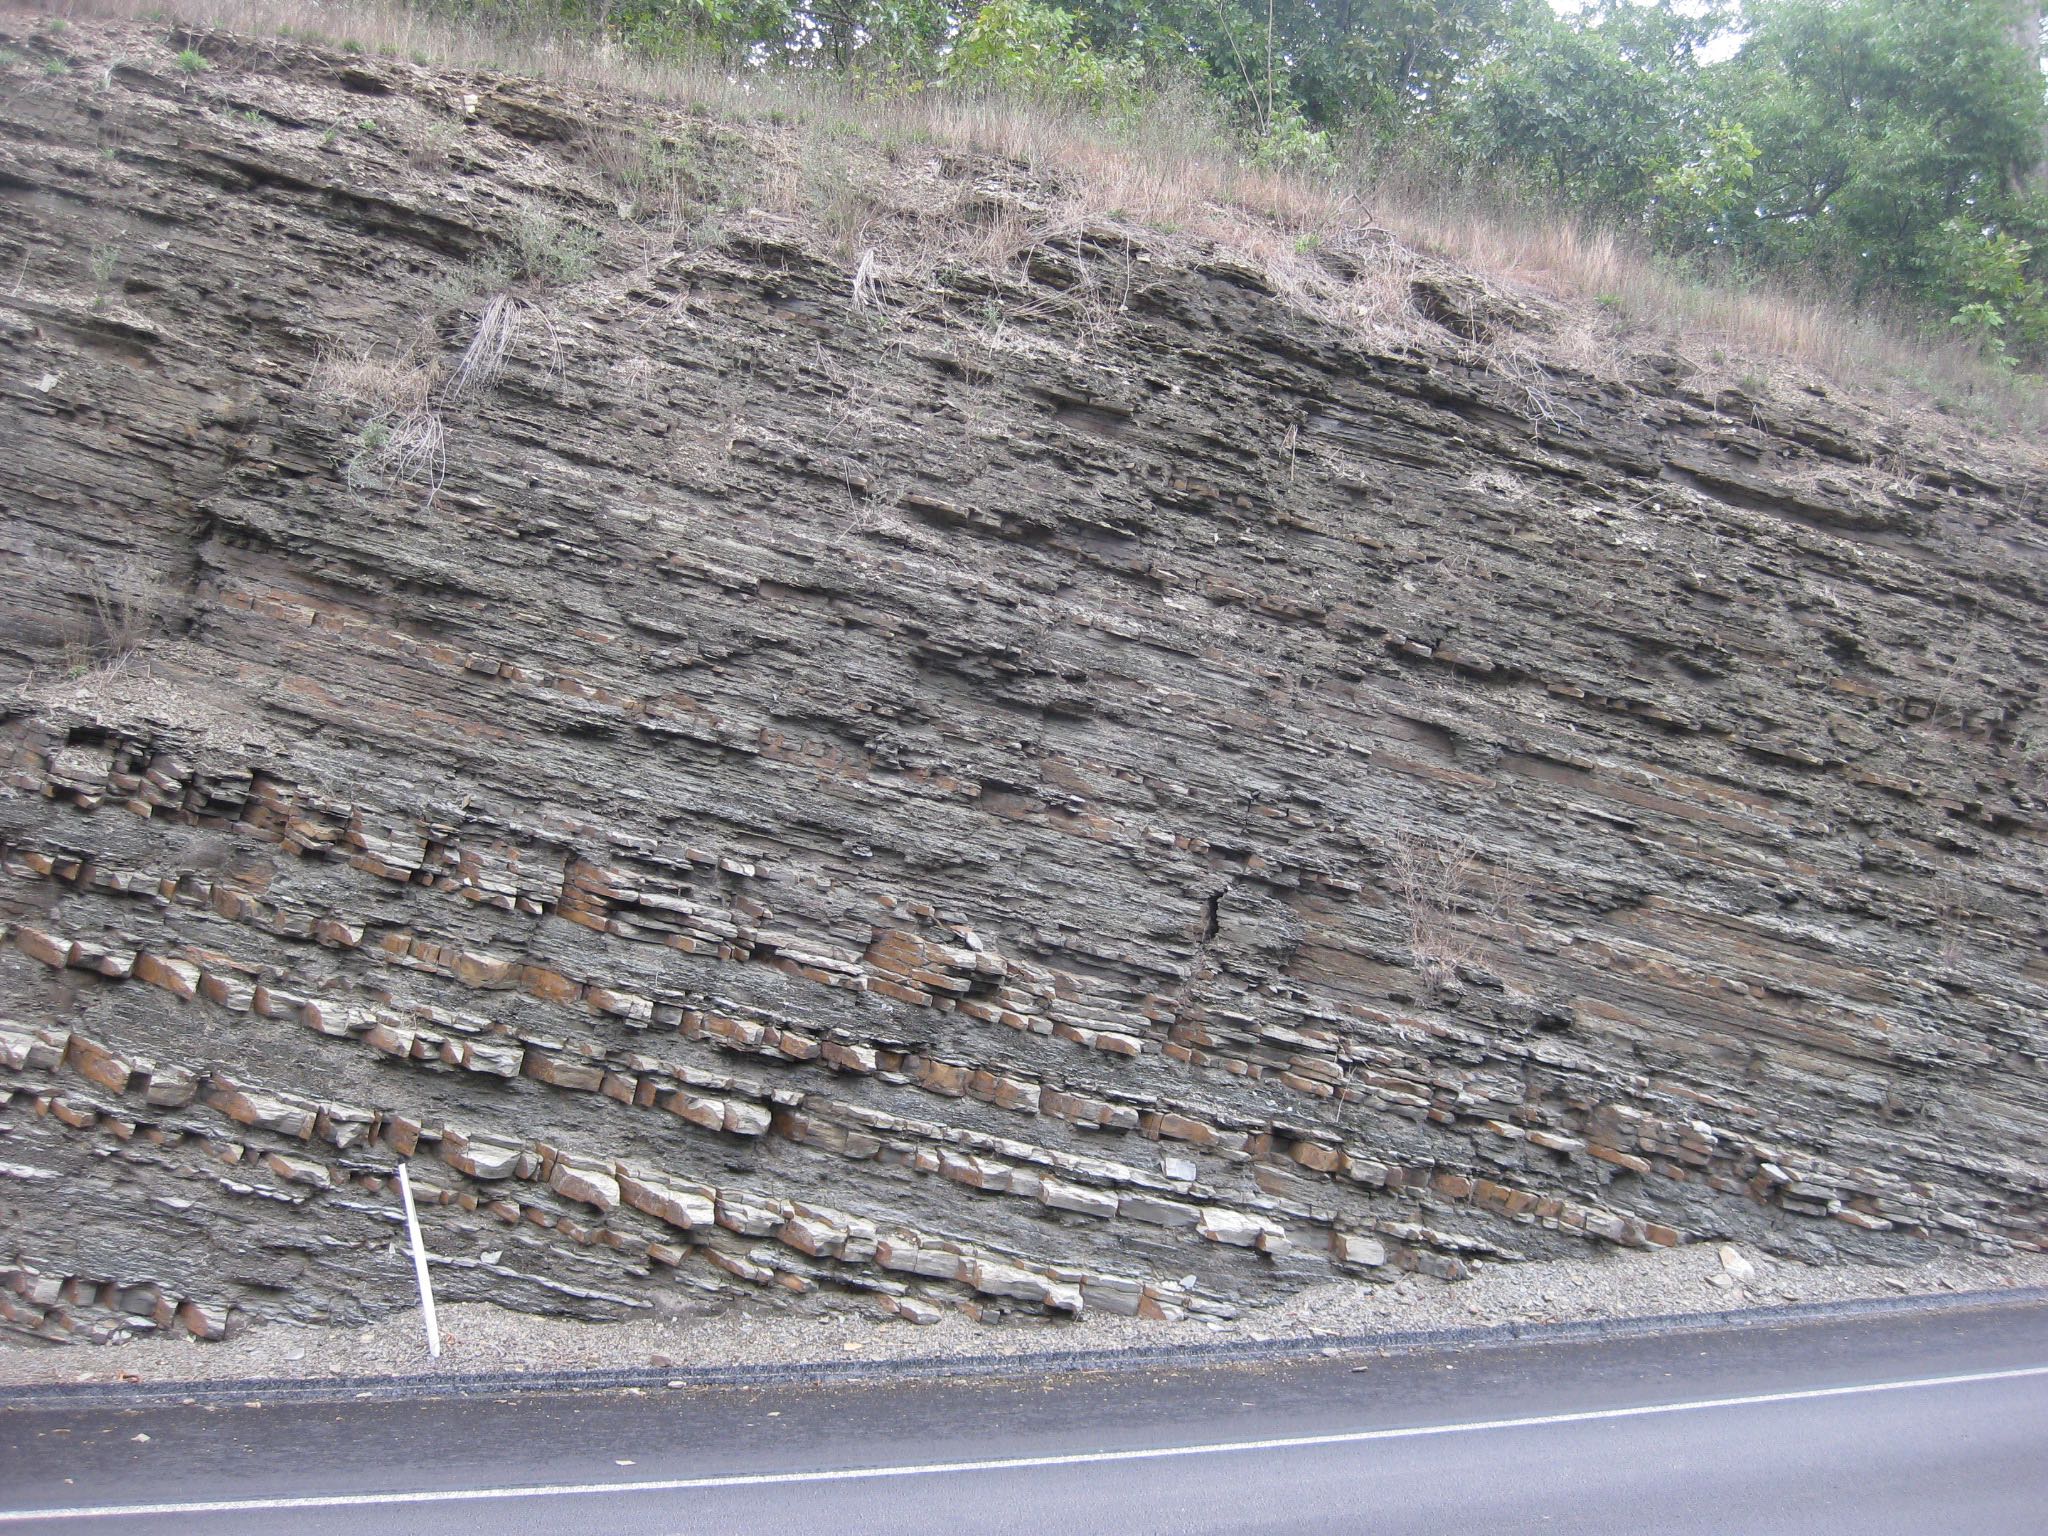 Outcrop of Devonian Brallier Formation on the north side of the Pennsylvania Turnpike, Pennsylvania